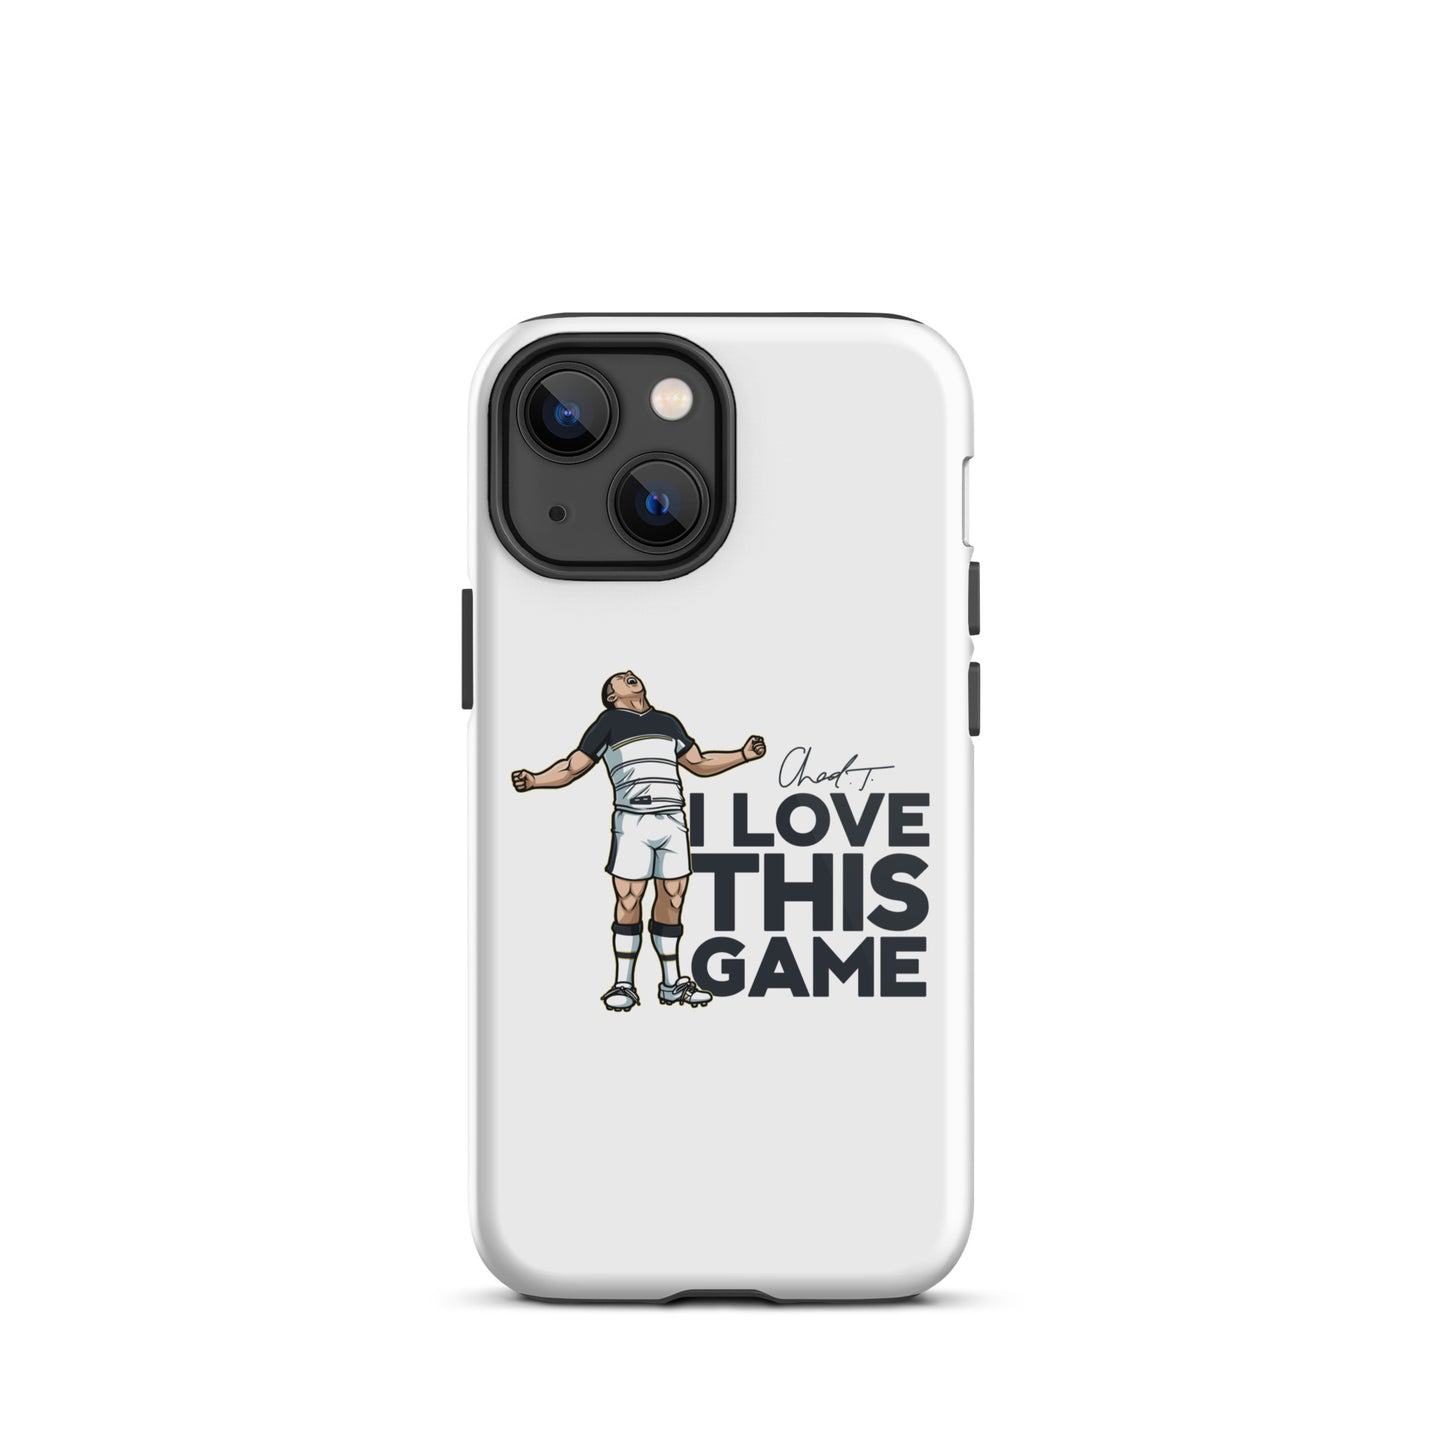 I LOVE THIS GAME iPhone case